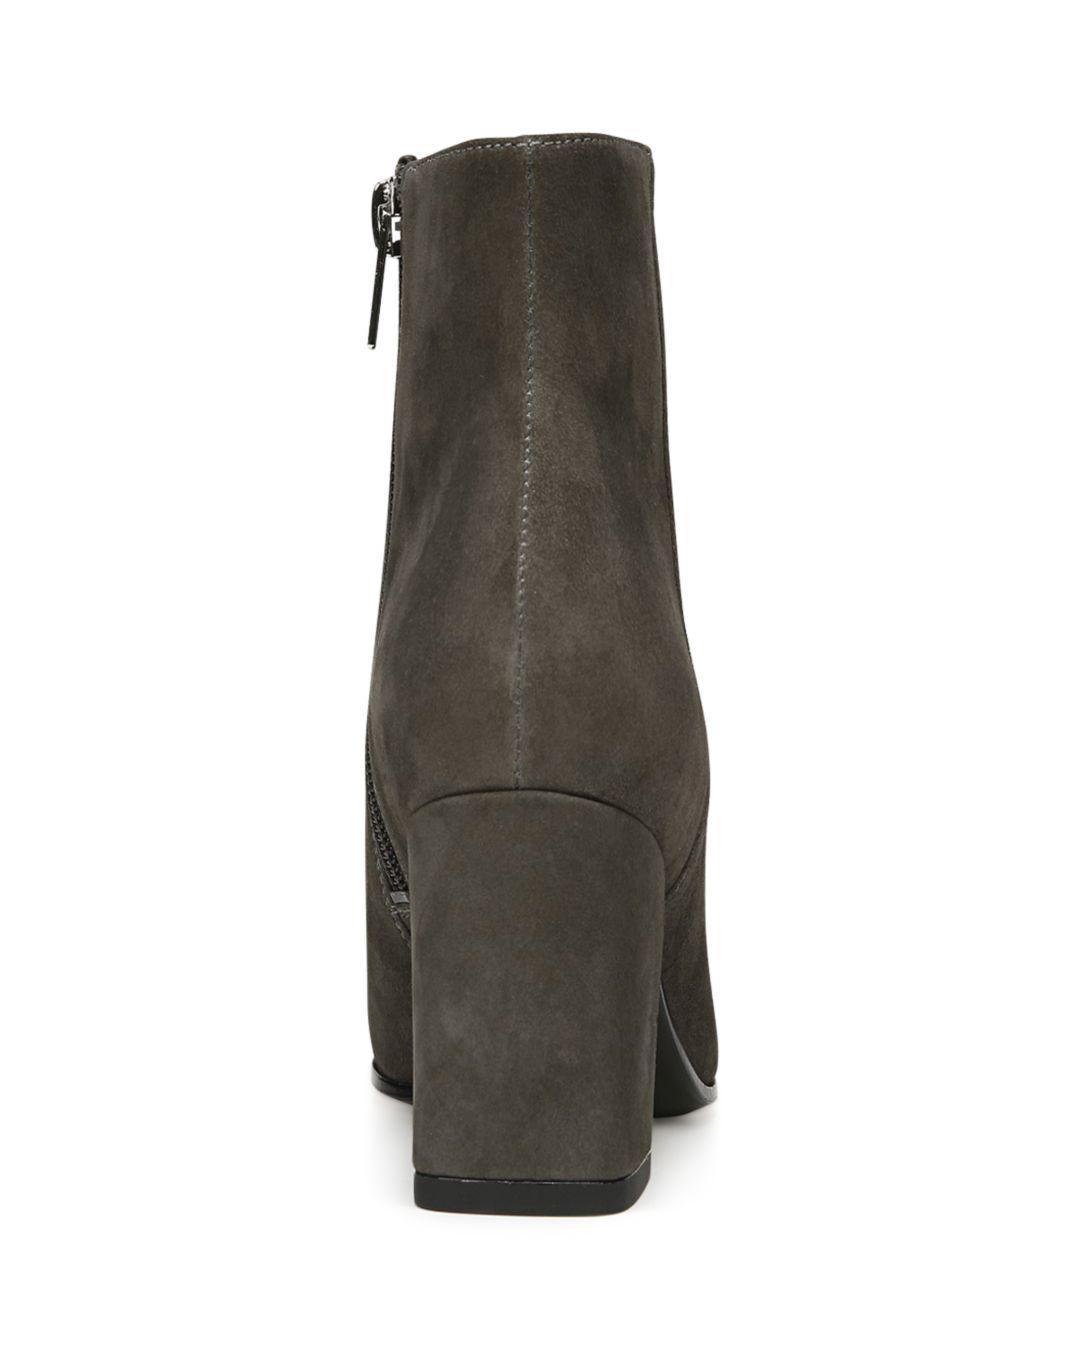 Grey Suede Details about   VIA SPIGA Women's Maury Ankle Boot 9.5 M US